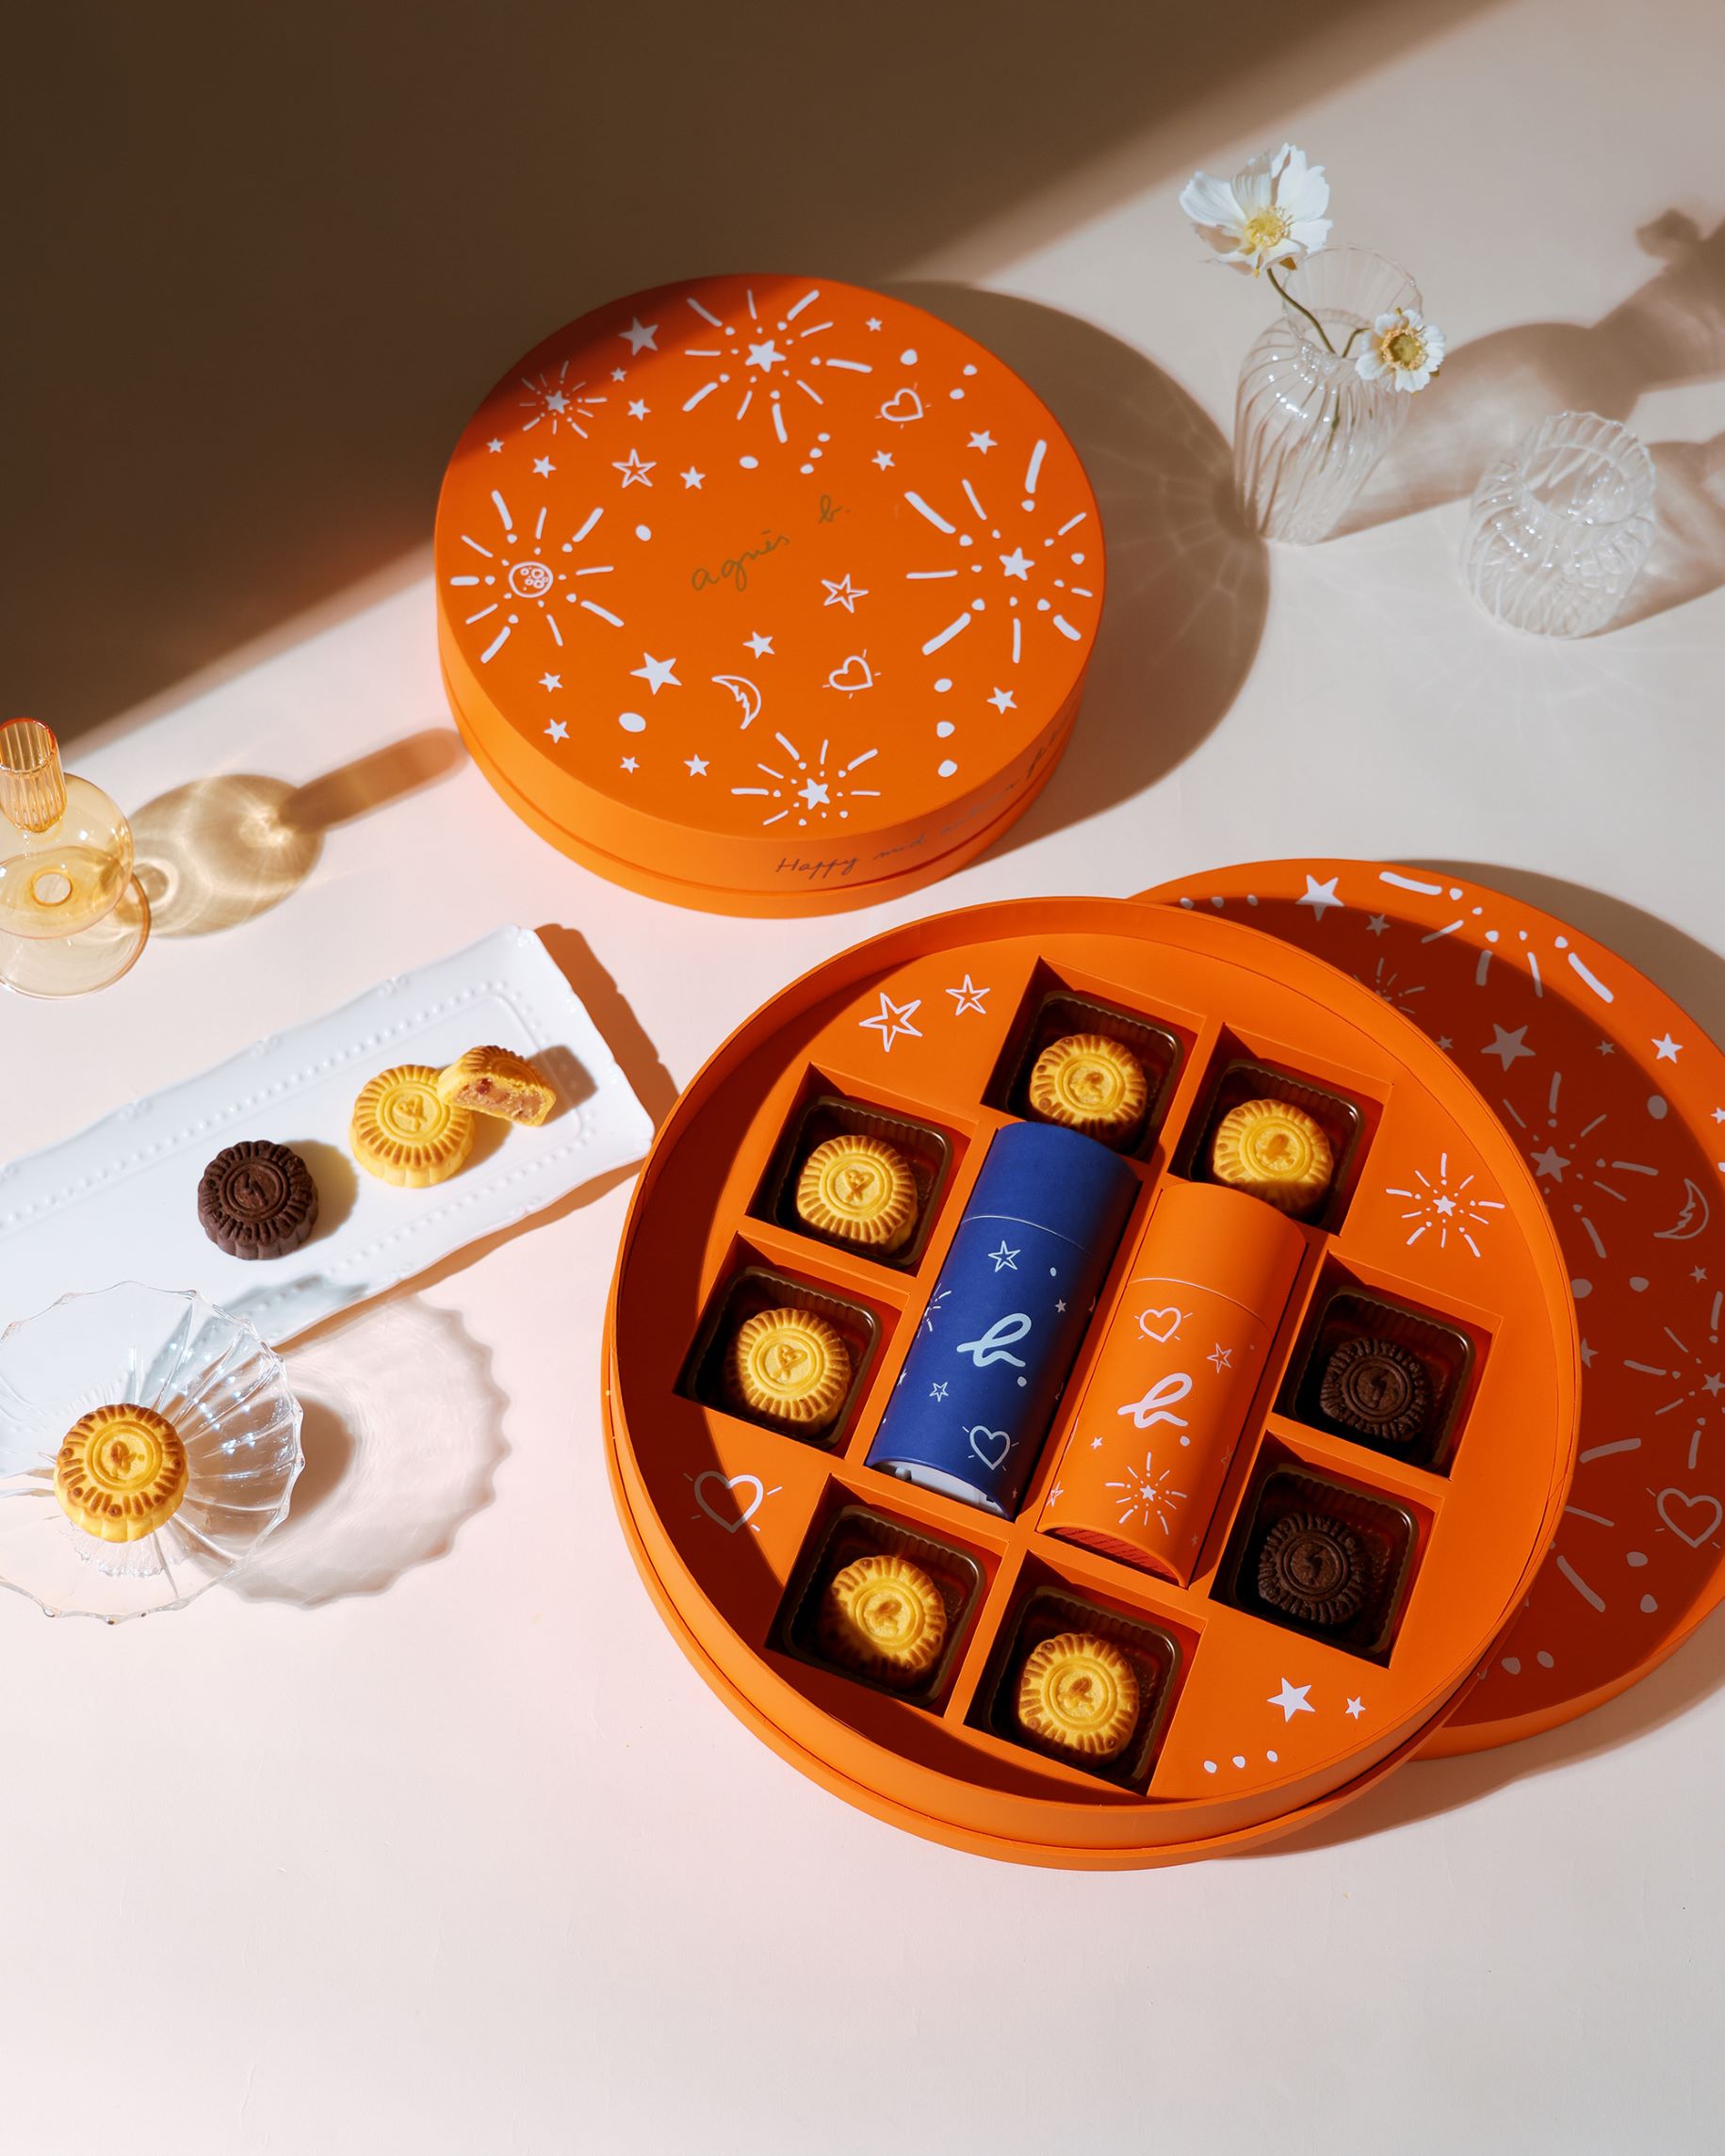 Gather around and share our curated list of festive mooncakes